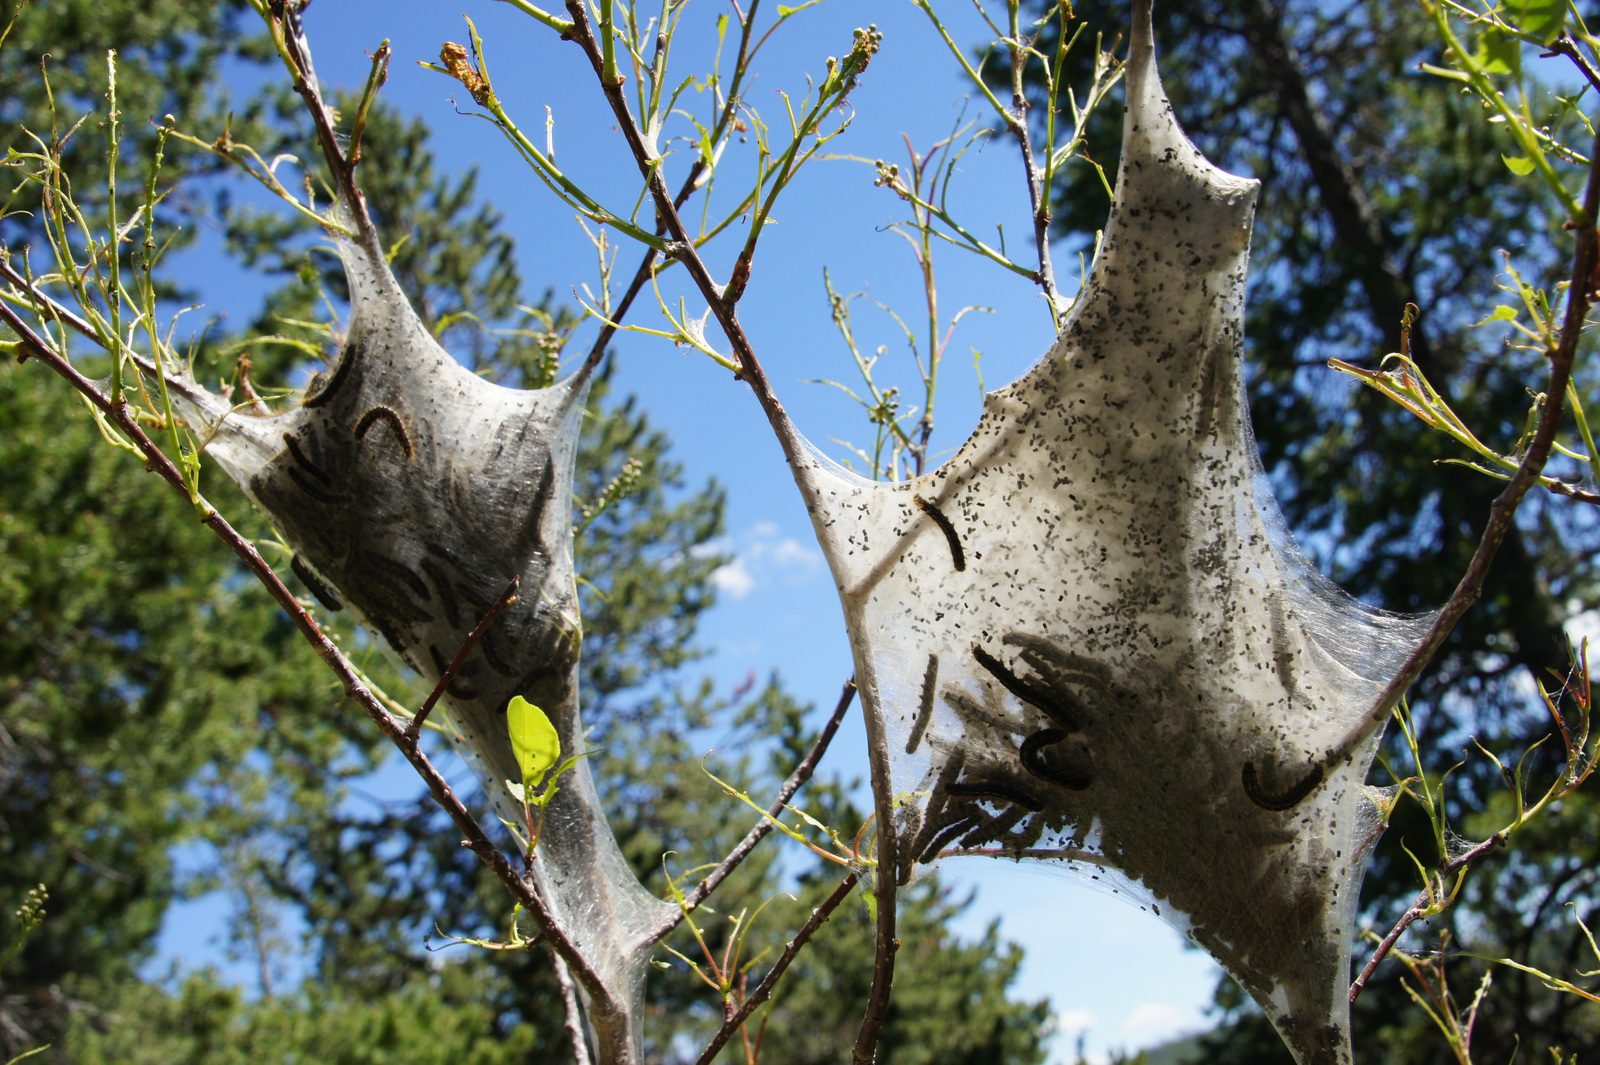 Tent caterpillars building their homes in Yellowstone.